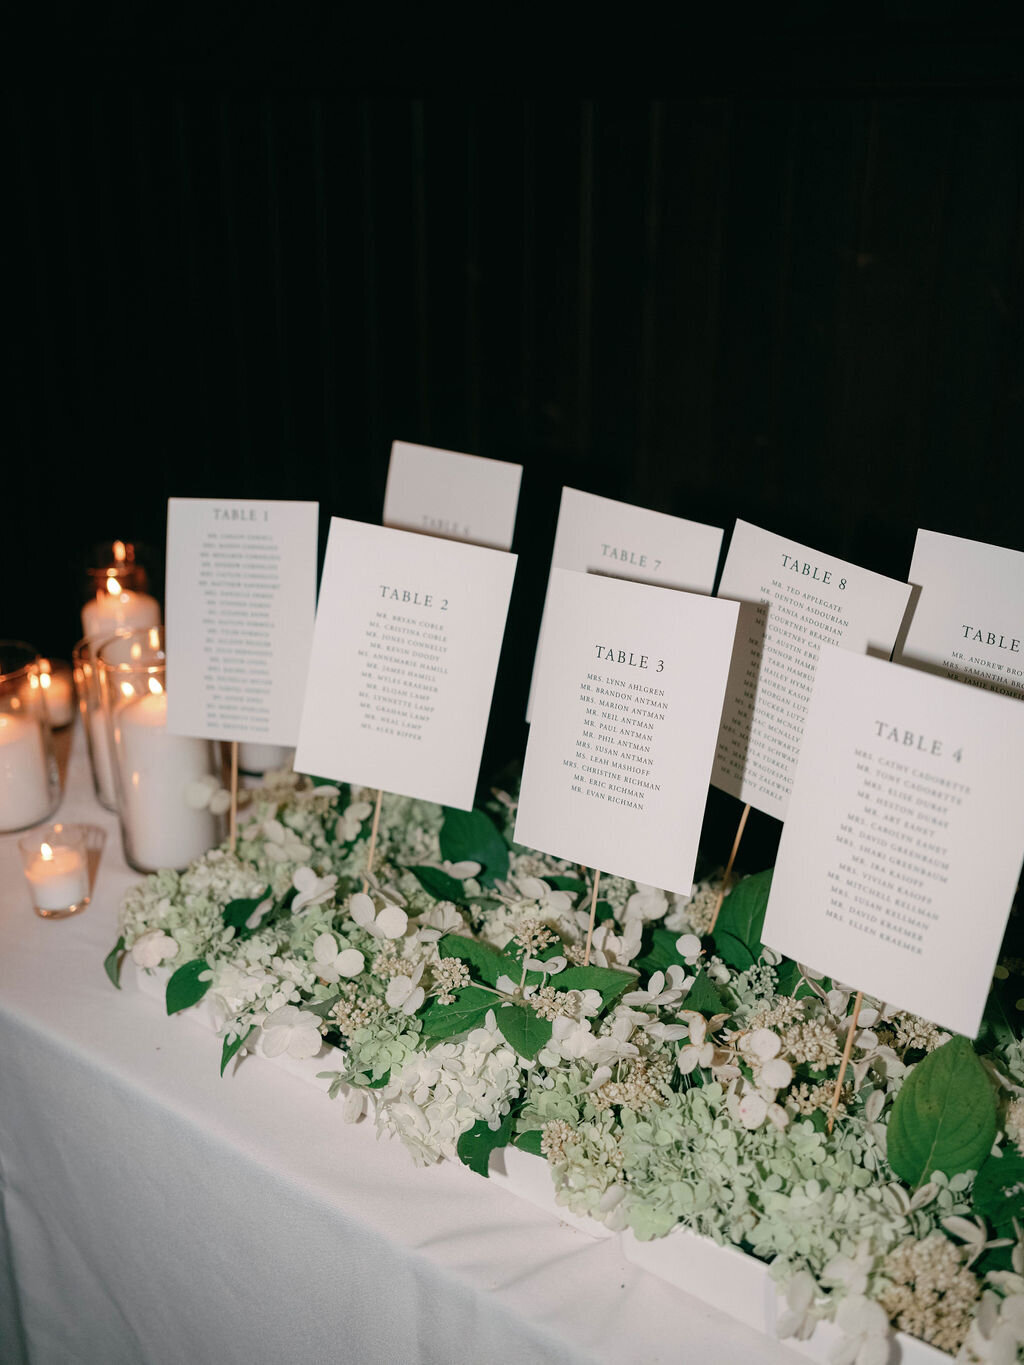 Escort card table meadow with white hydrangea blossoms.